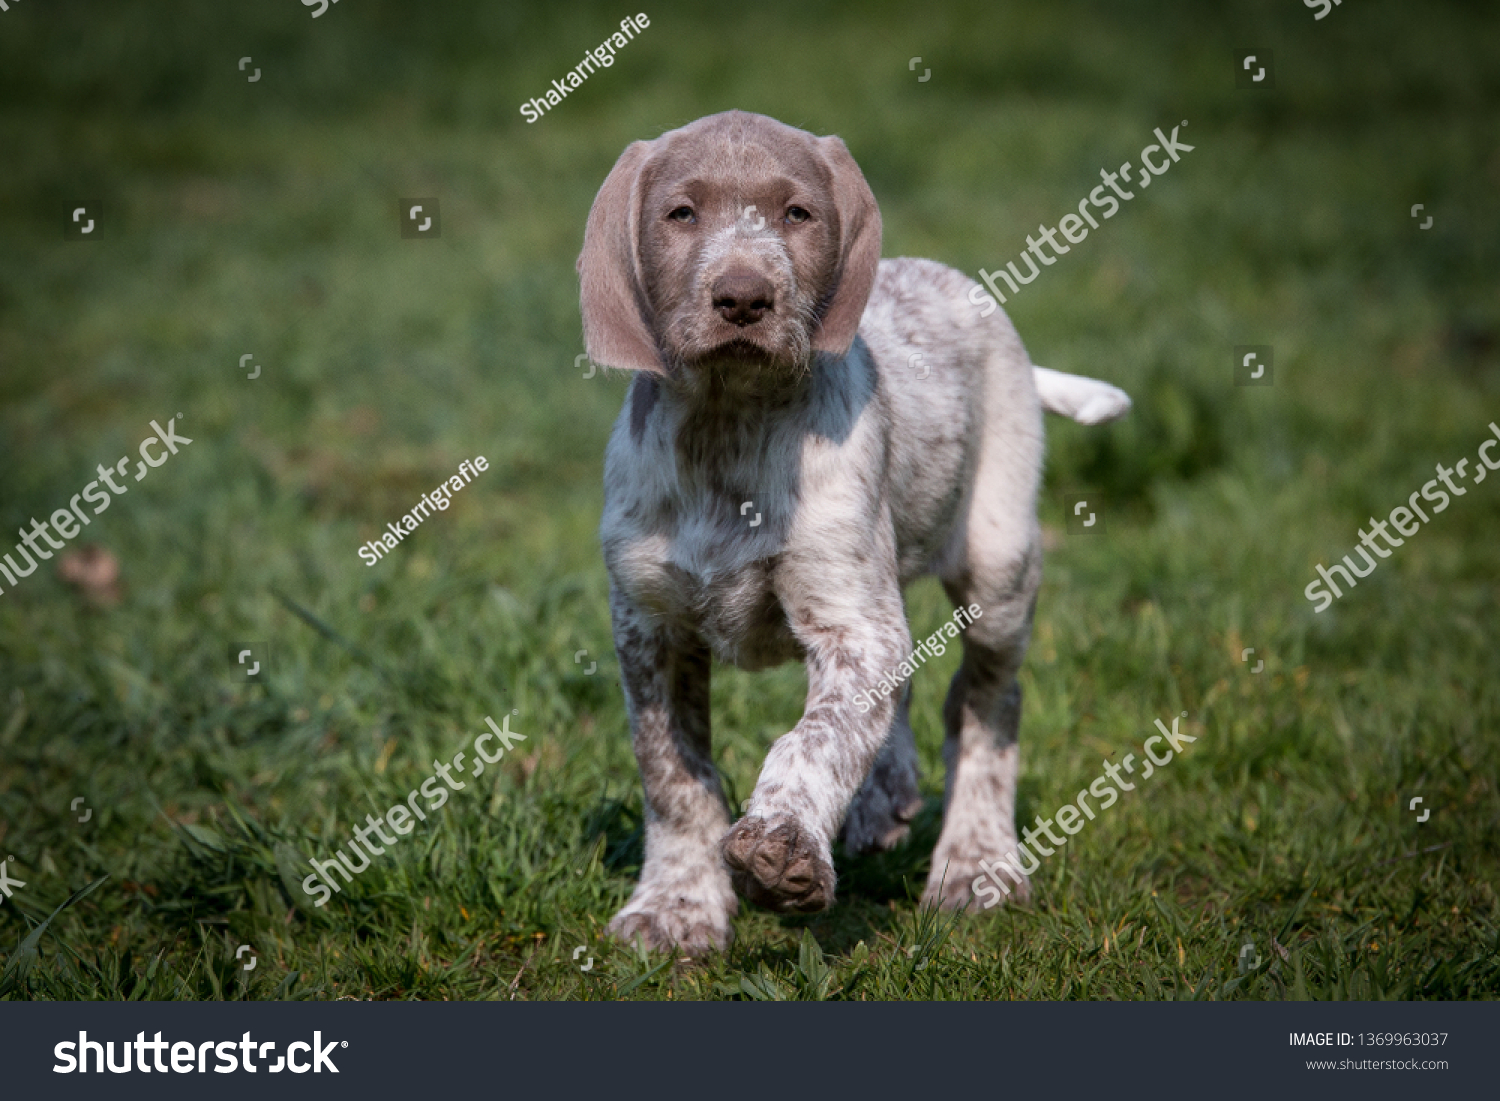 Slovakian Roughhaired Pointer Puppy Animals Wildlife Stock Image 1369963037